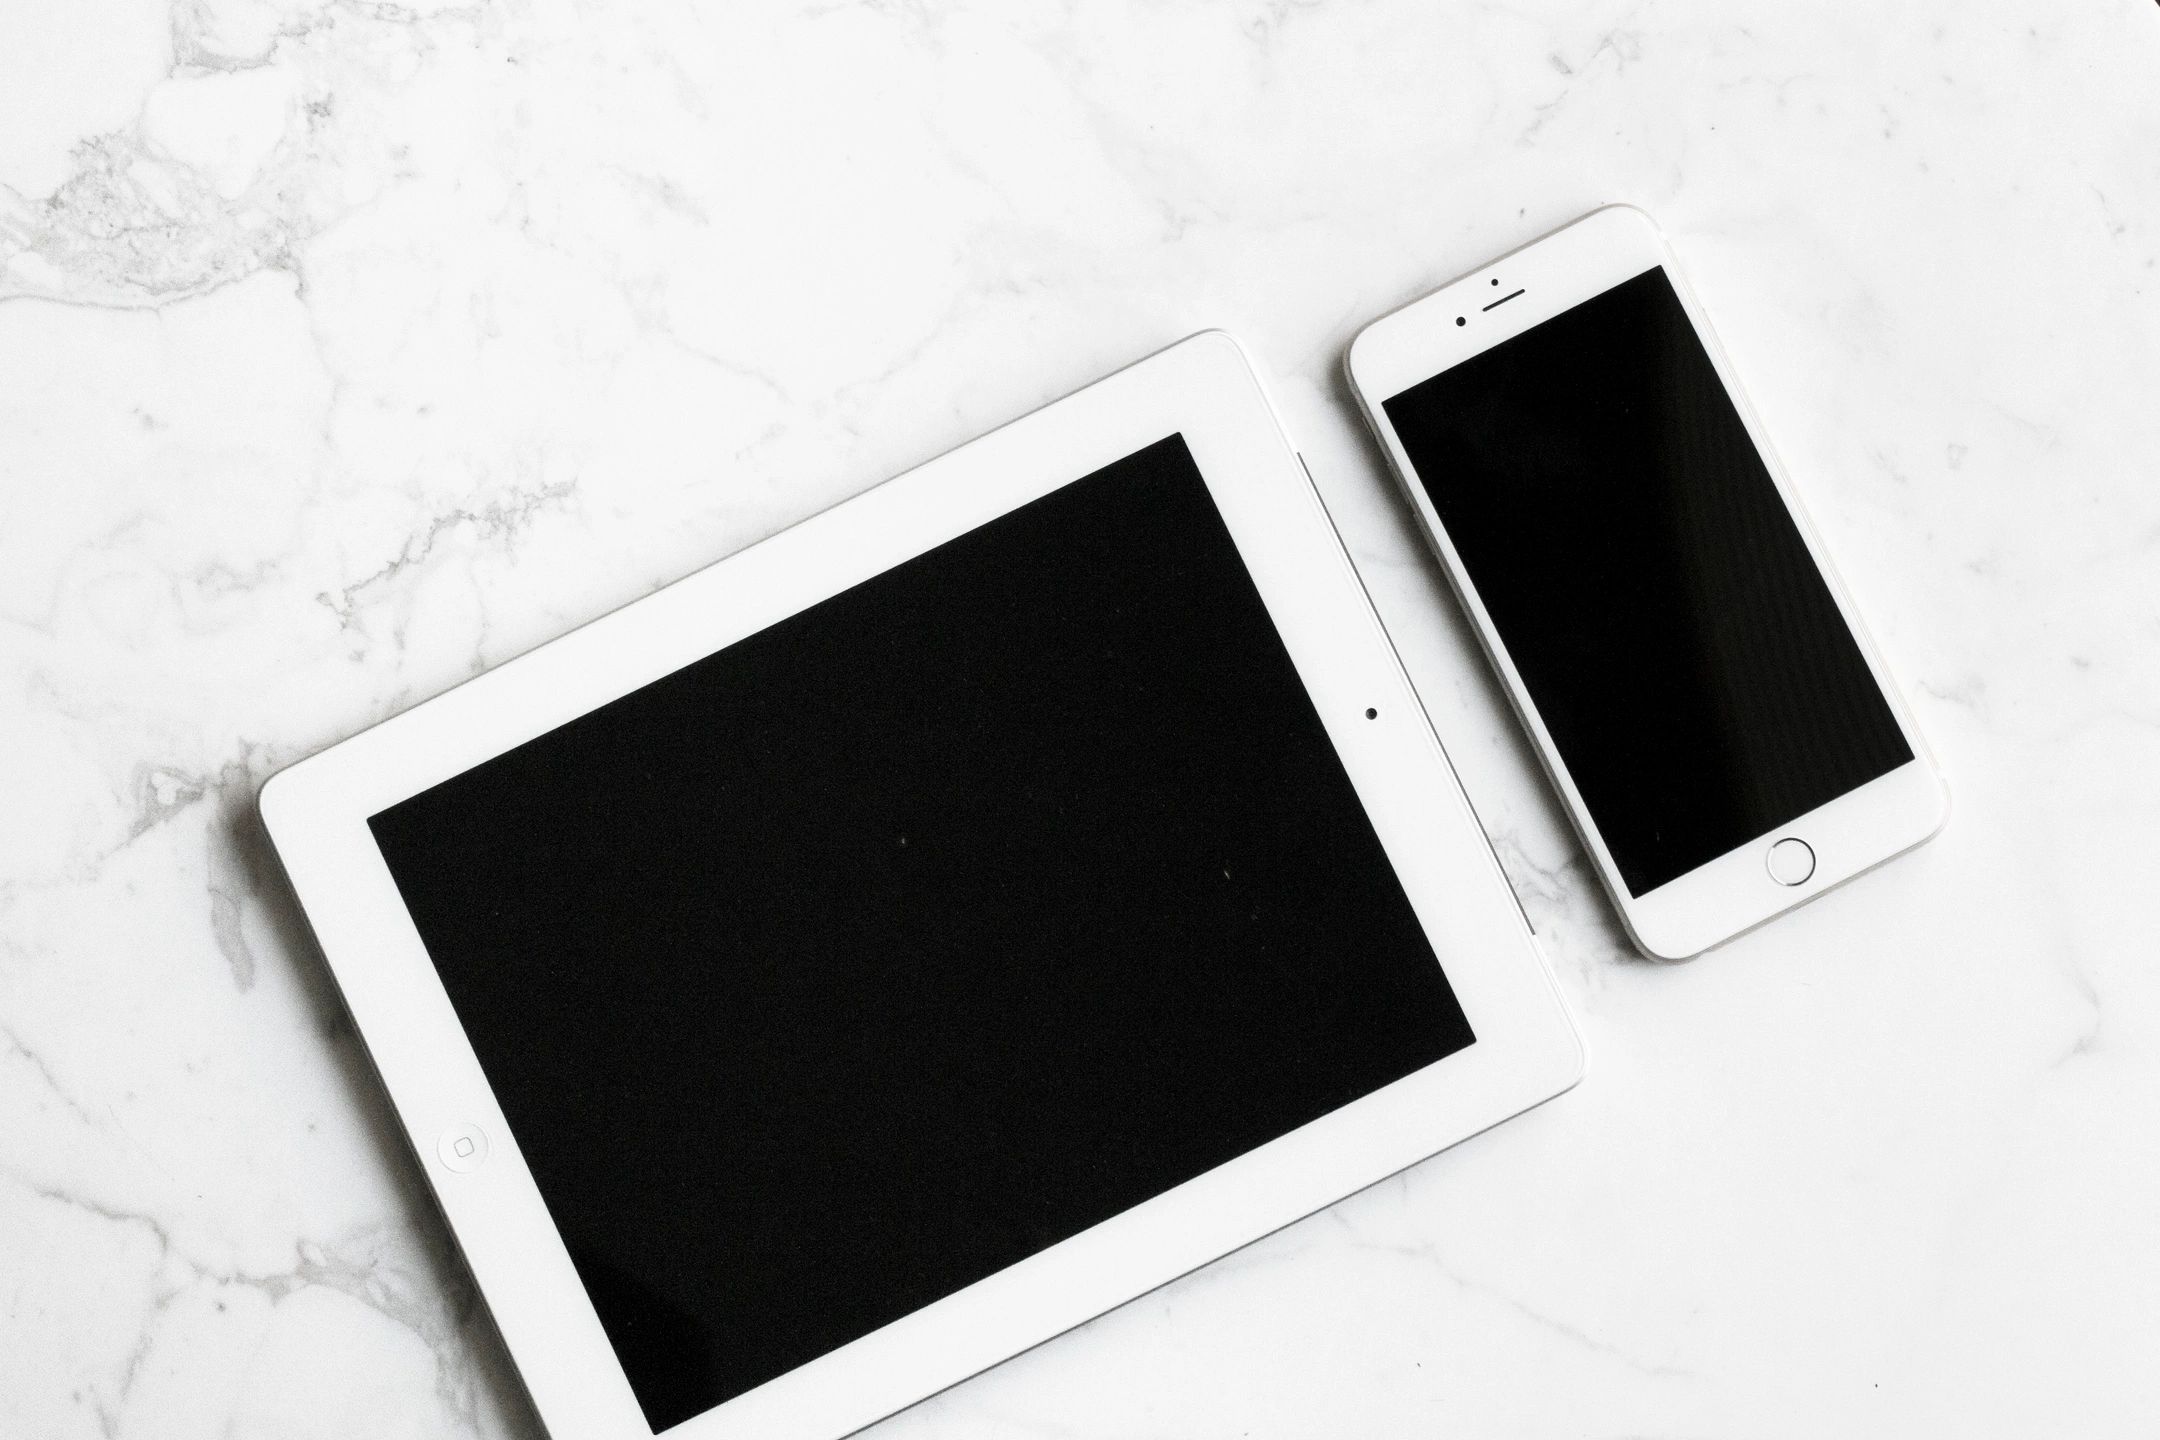 White colored tablet and smartphone sitting side by side on a marble counter top.